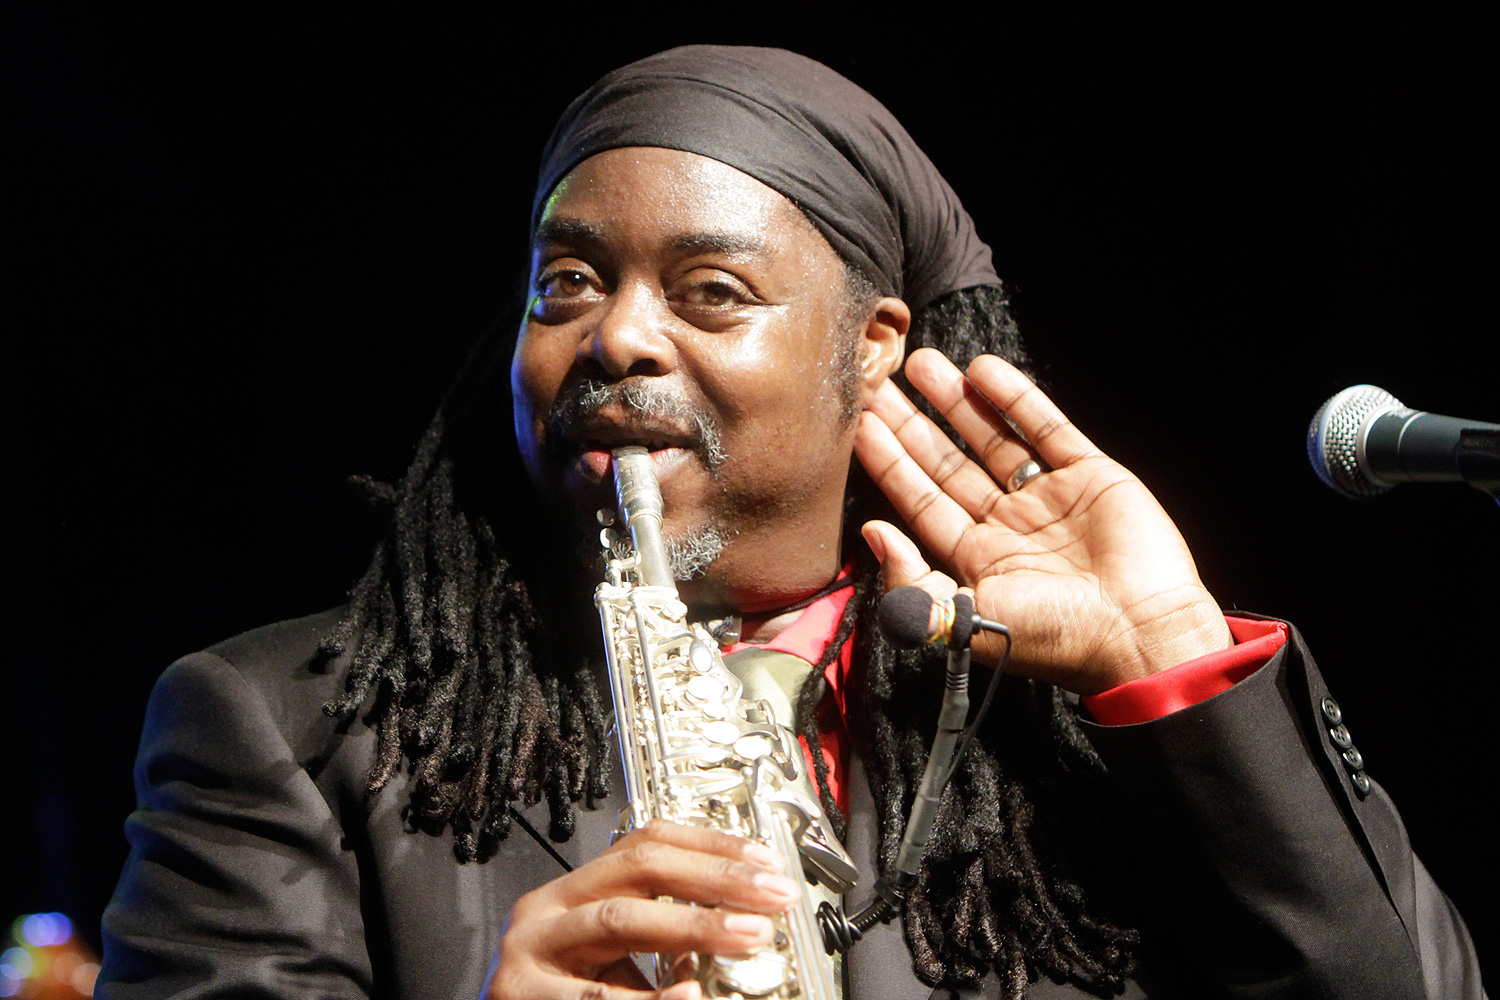 Courtney Pine - Band on the Wall1500 x 1000